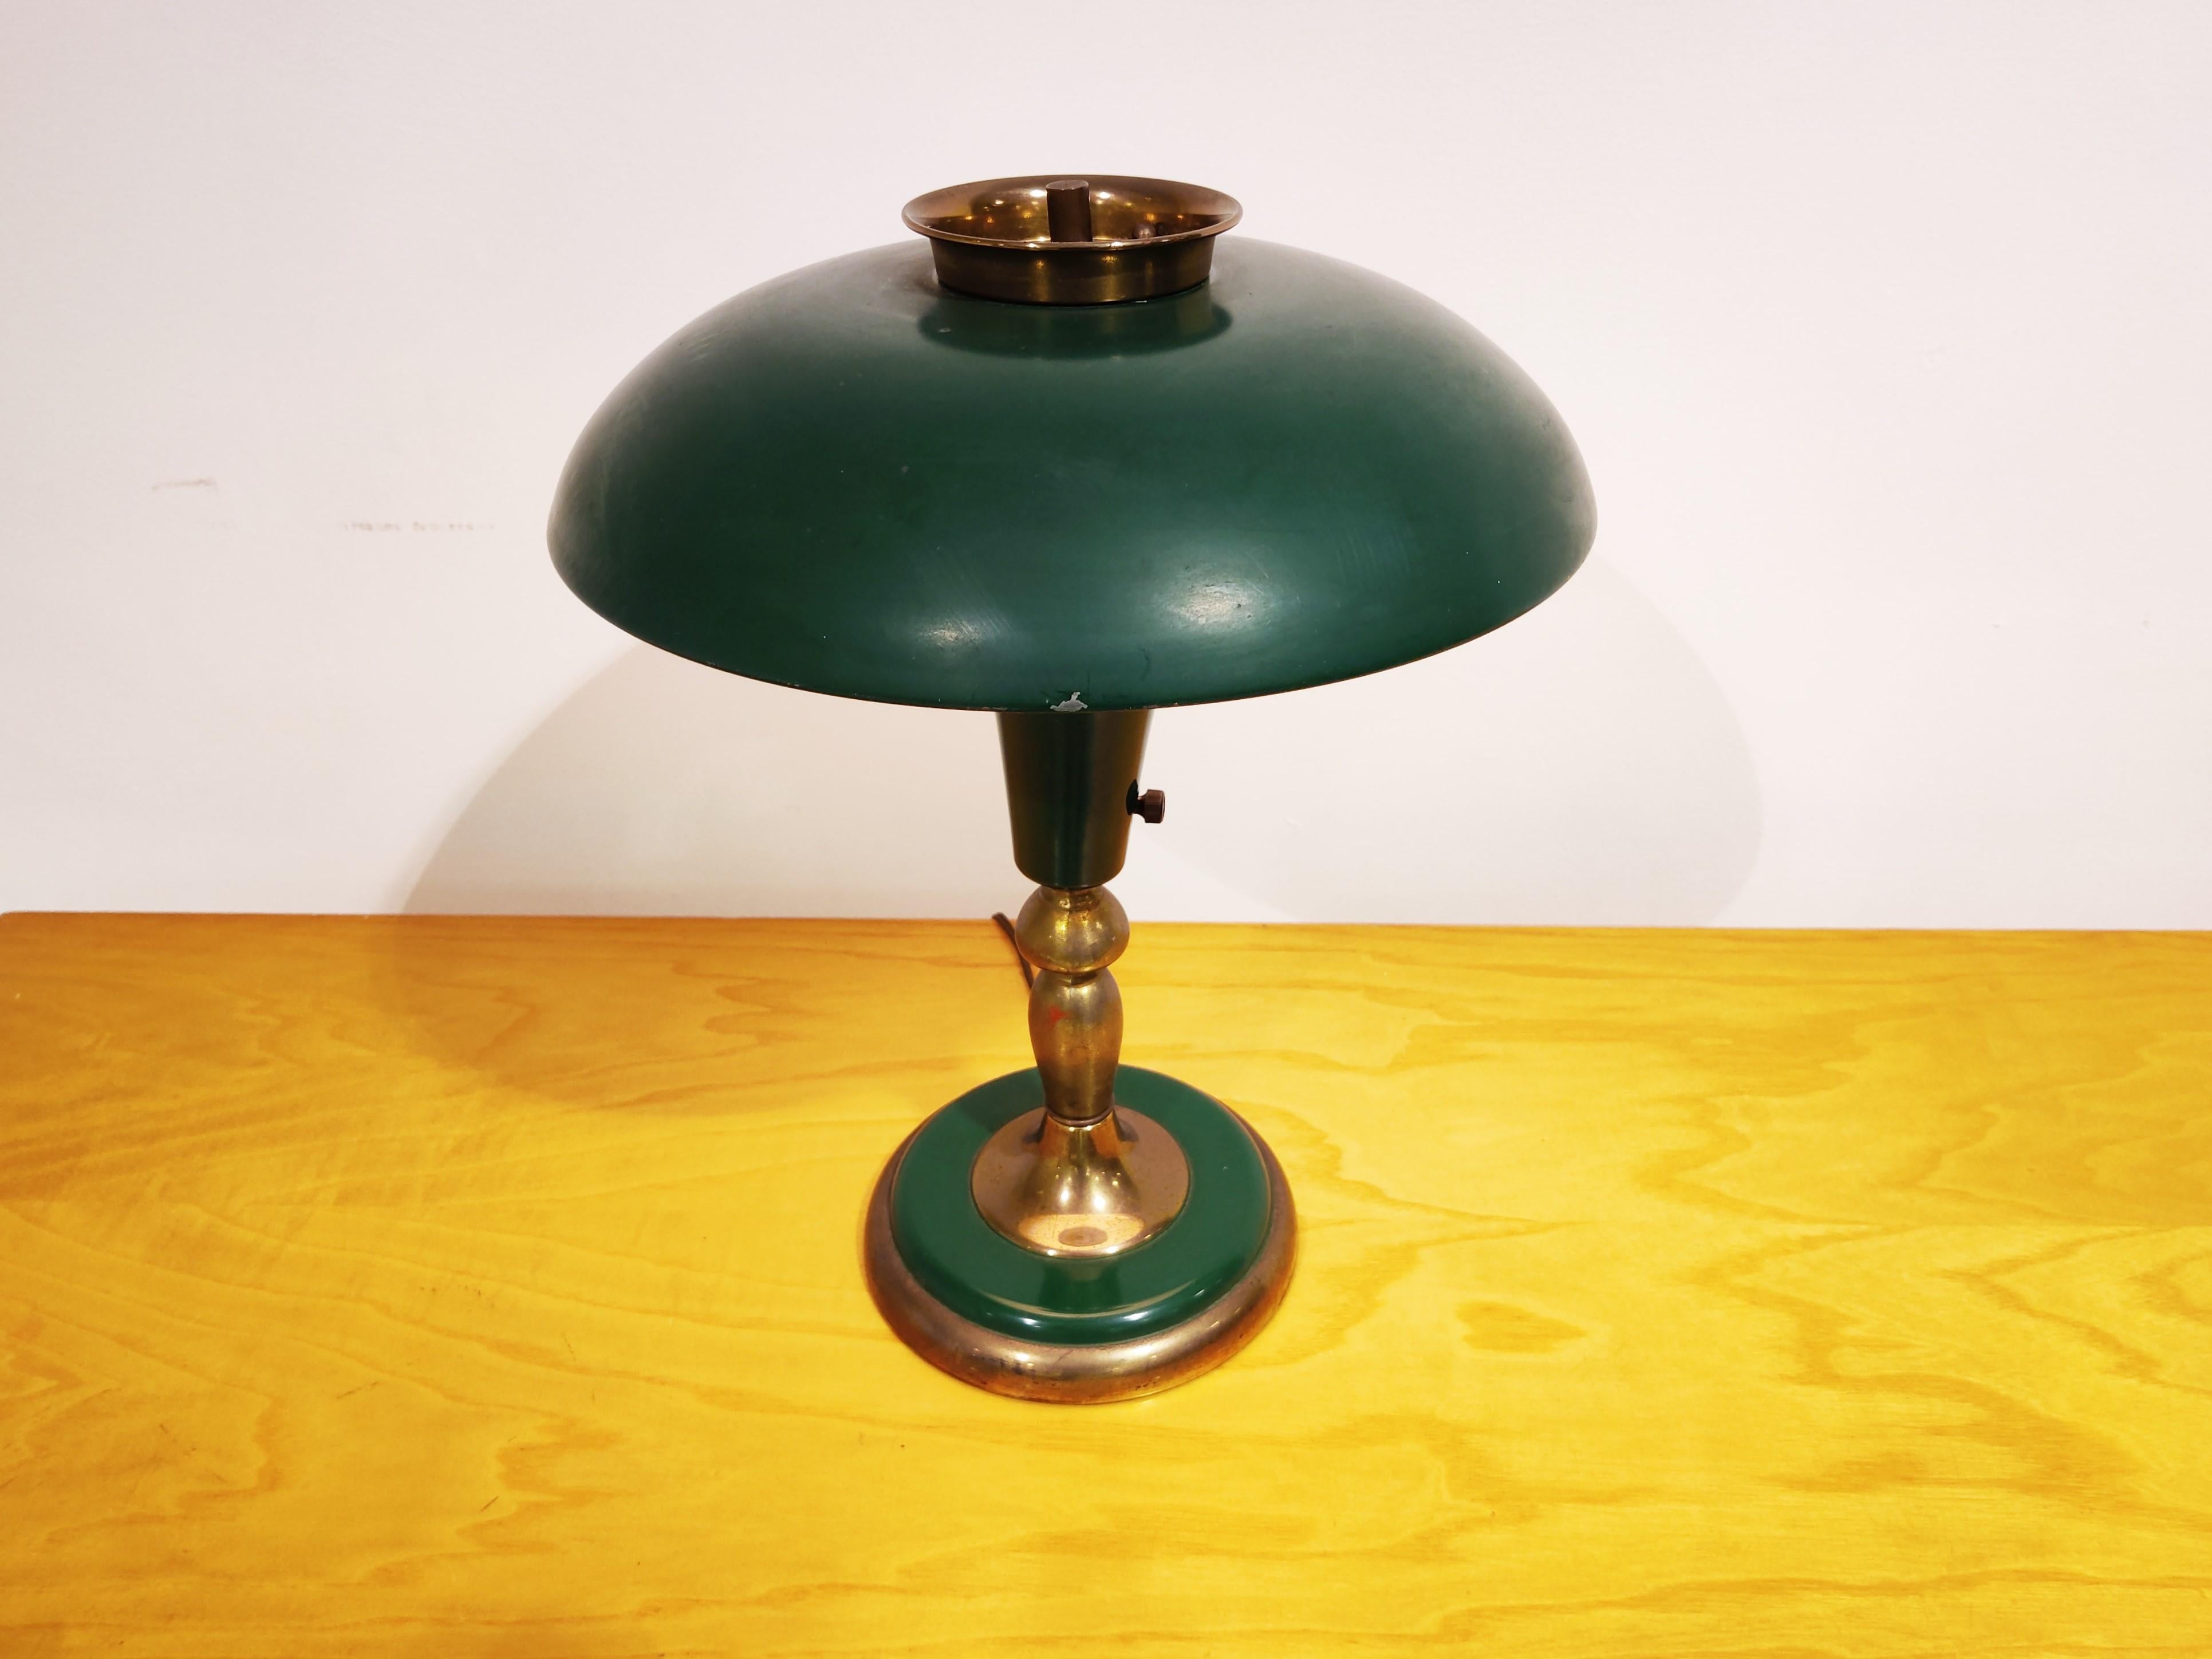 Elegant green metal and brass 'mushroom' Art Deco desk lamp with an adjustable shade. 

Beautiful original condion with patinated brass and the original 'turning' switch.

It takes a small e14 light bulb. Lamp is suitable for use in the usa and